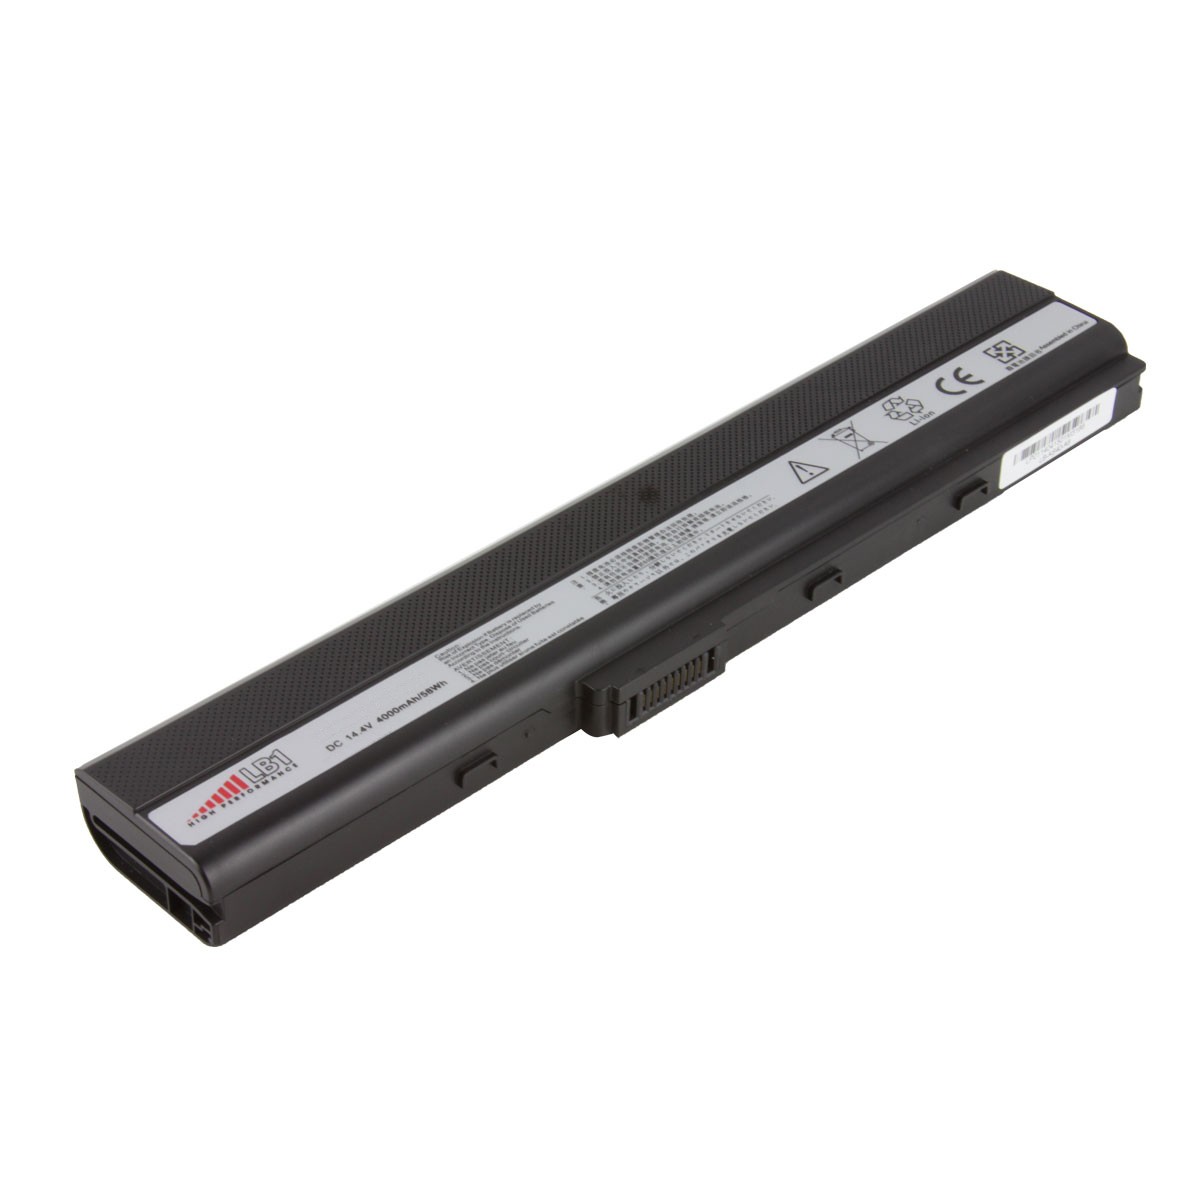 BATTERY FOR NOTEBOOK ASUS K52 X52 K42 A42 N82 M&M COPY ,Laptop Battery